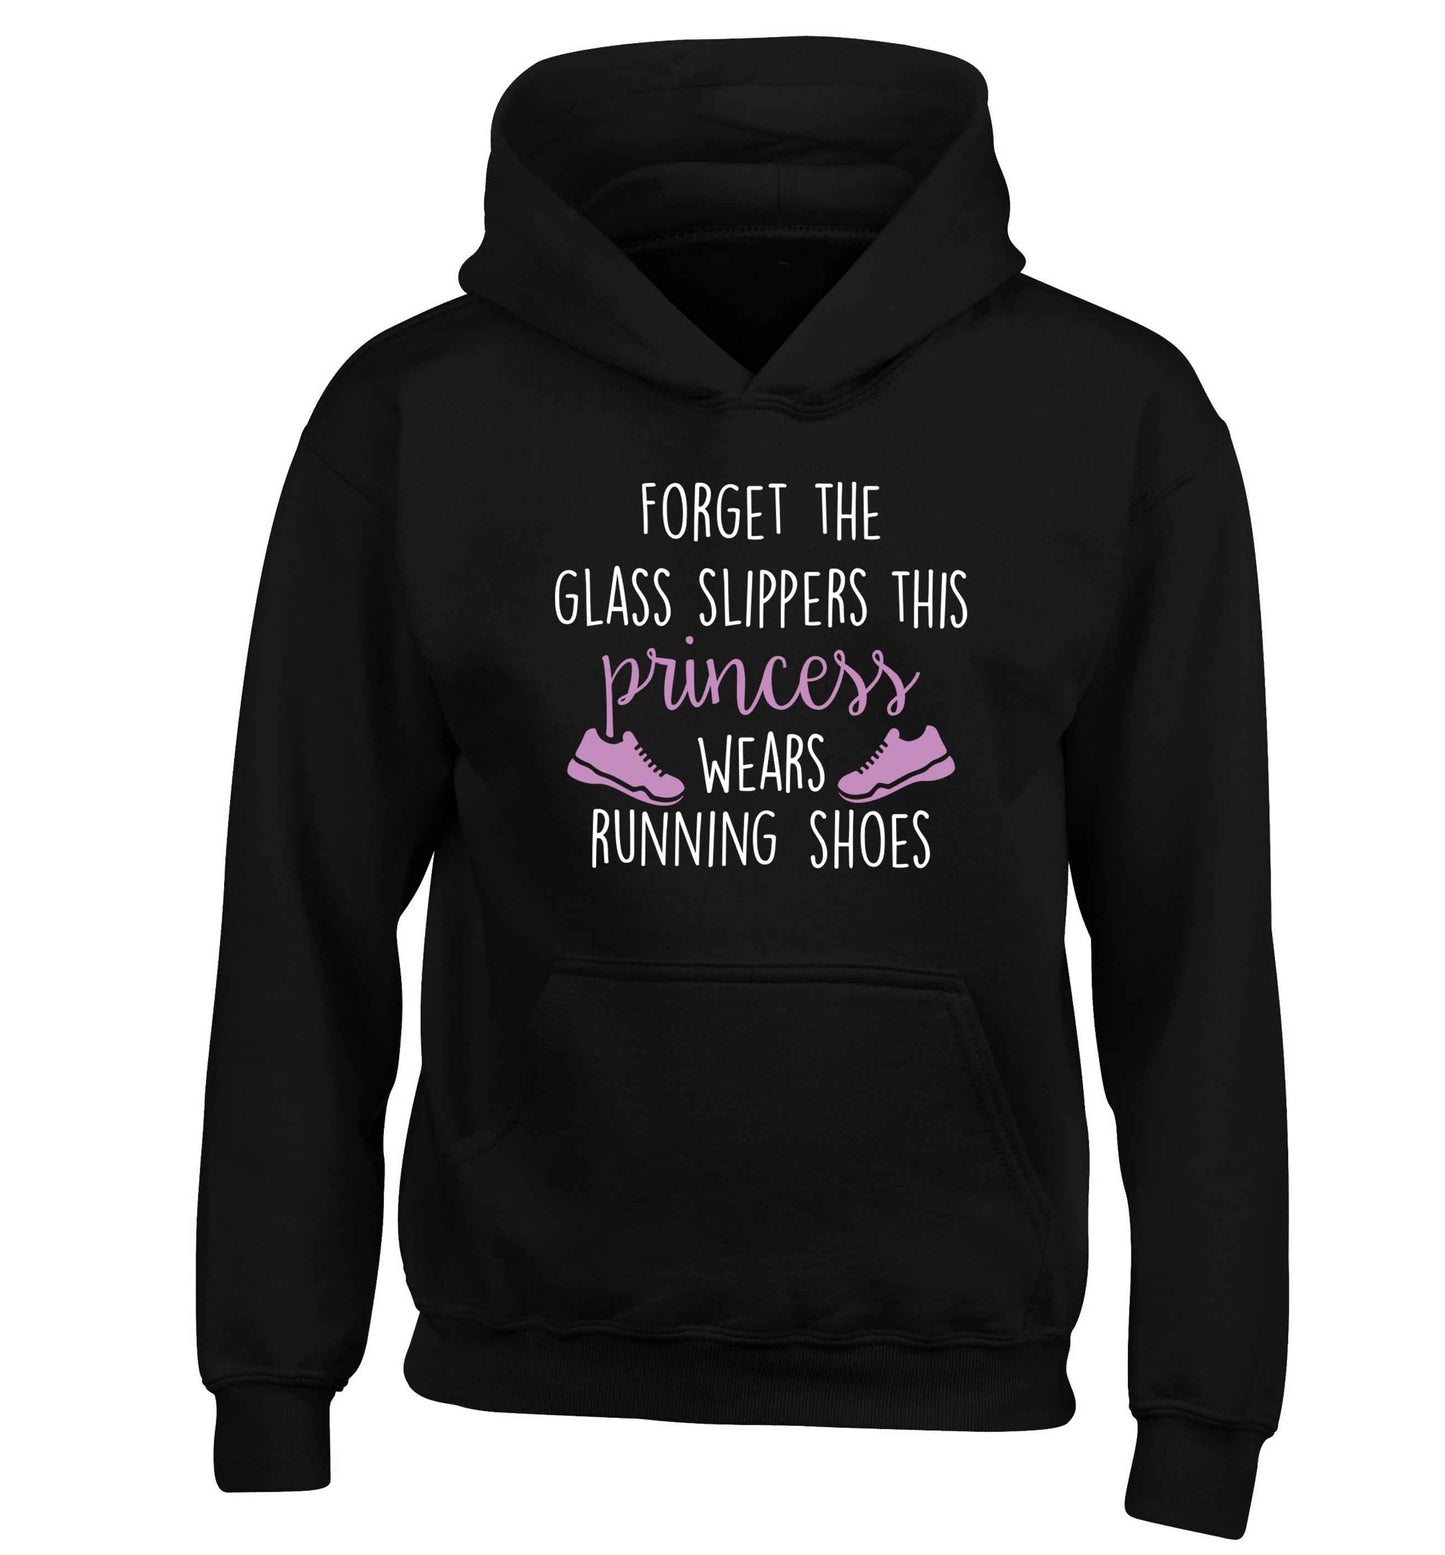 Forget the glass slippers this princess wears running shoes children's black hoodie 12-13 Years